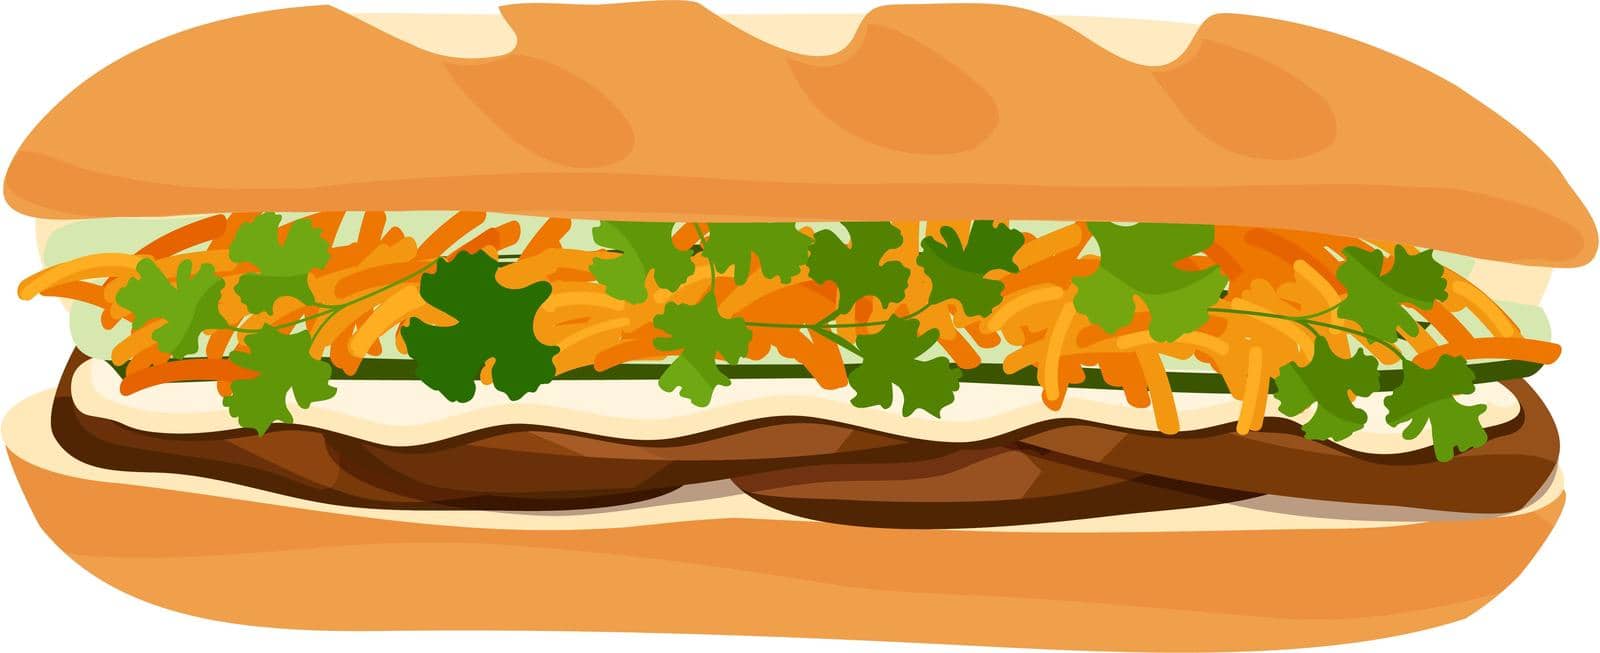 Beef Vietnamese Banh Mi sandwich with cilantro, shredded carrots, cucumbers, and mayonnaise sauce isolated on a white background. Vector illustration.